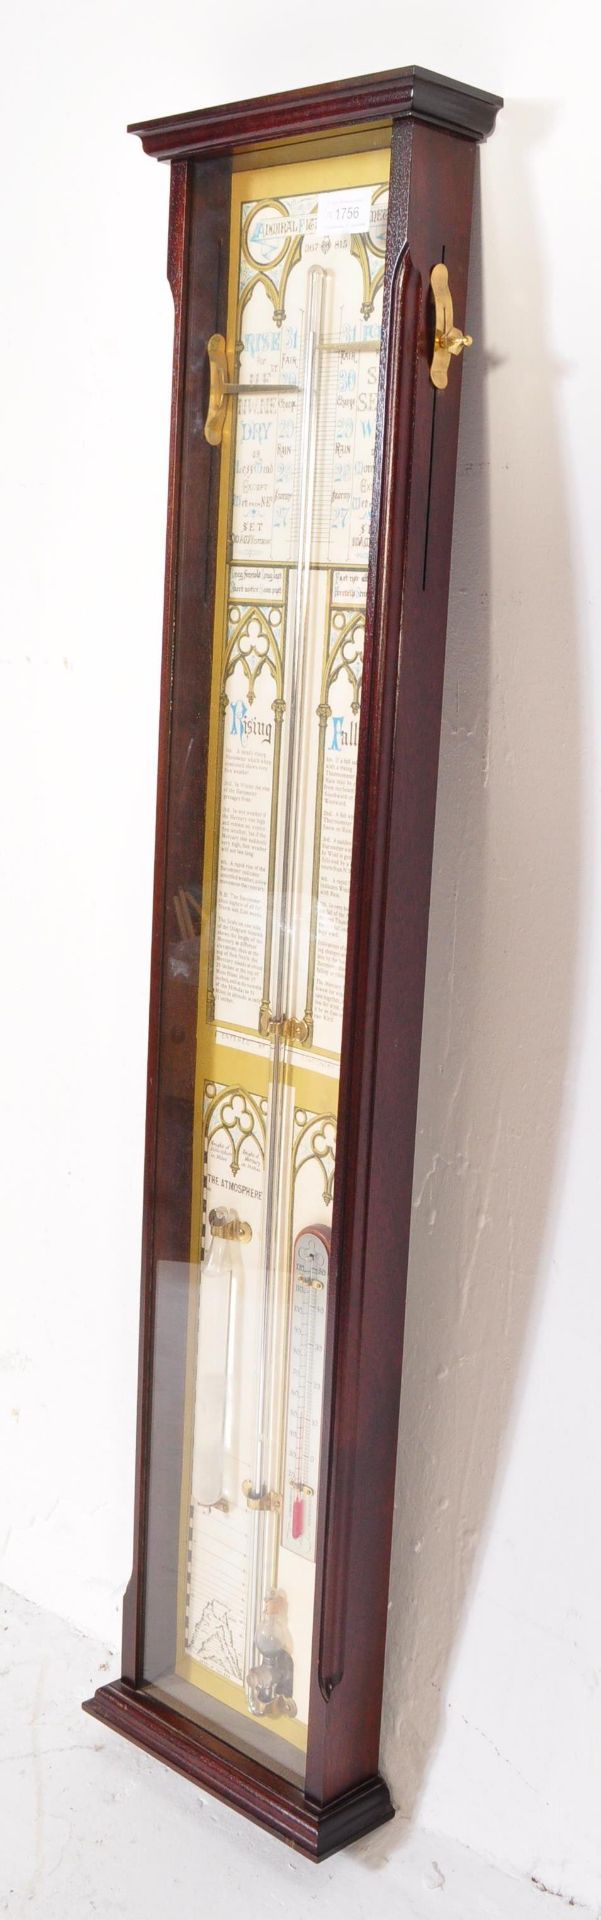 MAHOGANY CASED ADMIRAL FITZROY WALL BAROMETER - Image 5 of 6